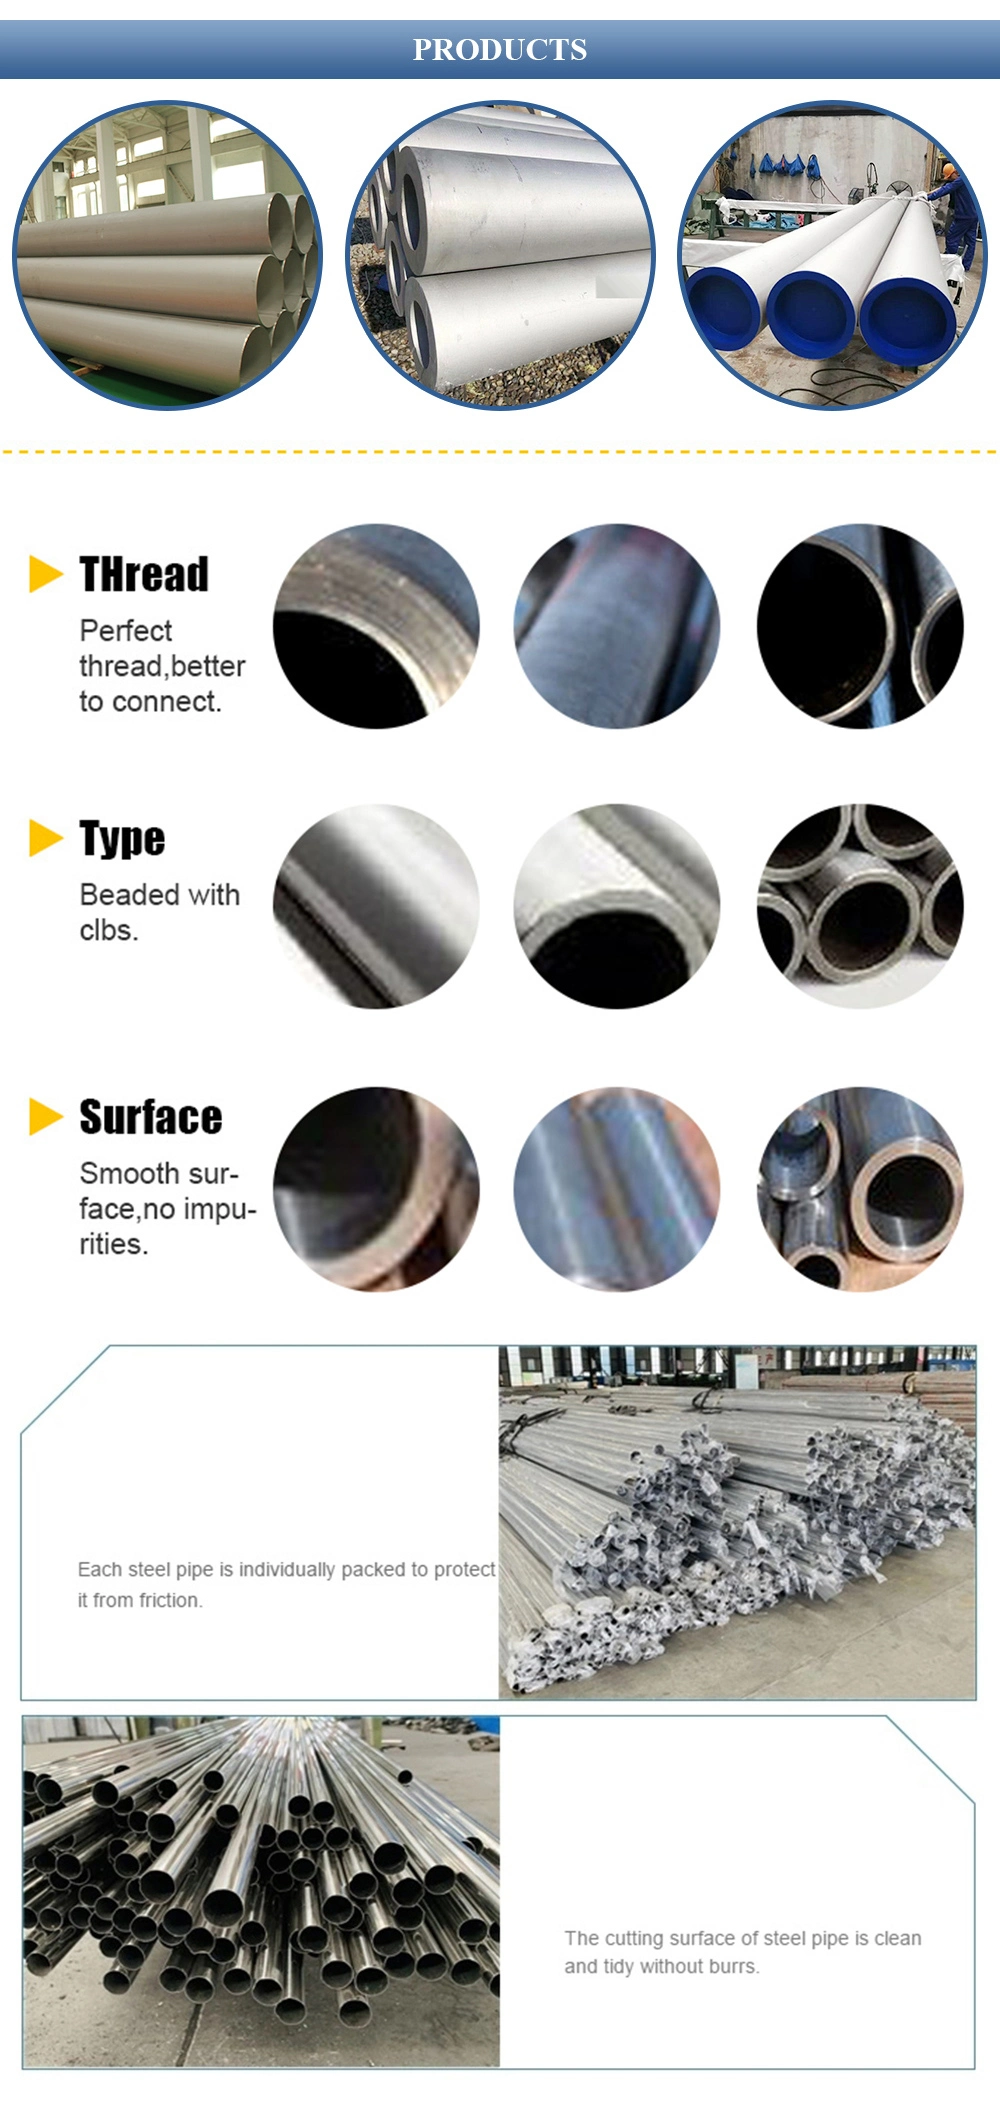 ASTM A780/ASTM A790 S31500/S31803/S32205/S32750/S32760 Duplex Stainless Steel Pipe/Tube